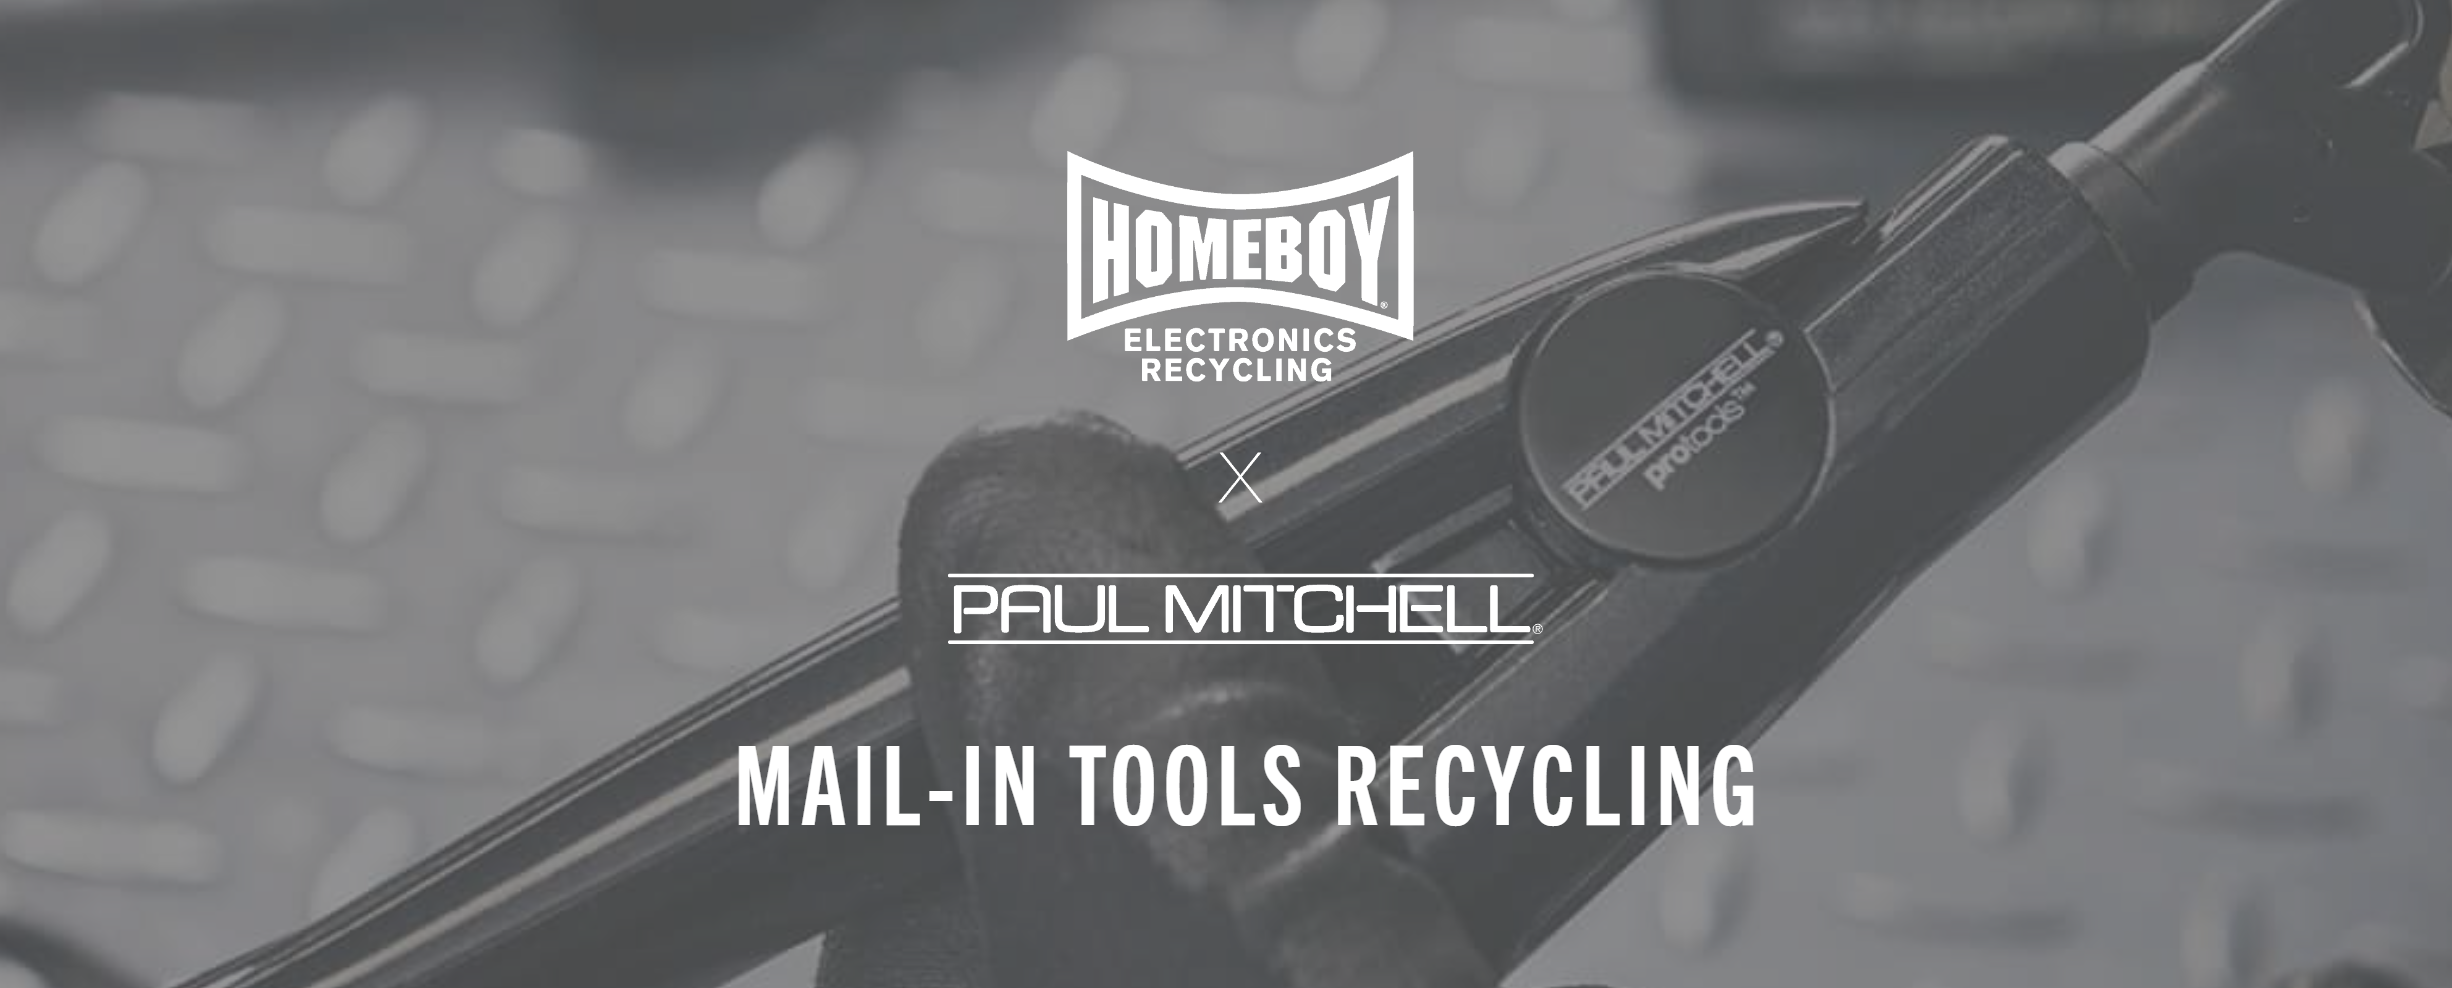 Paul Mitchell and Homeboy Electronics Recycling: Salon Appliances